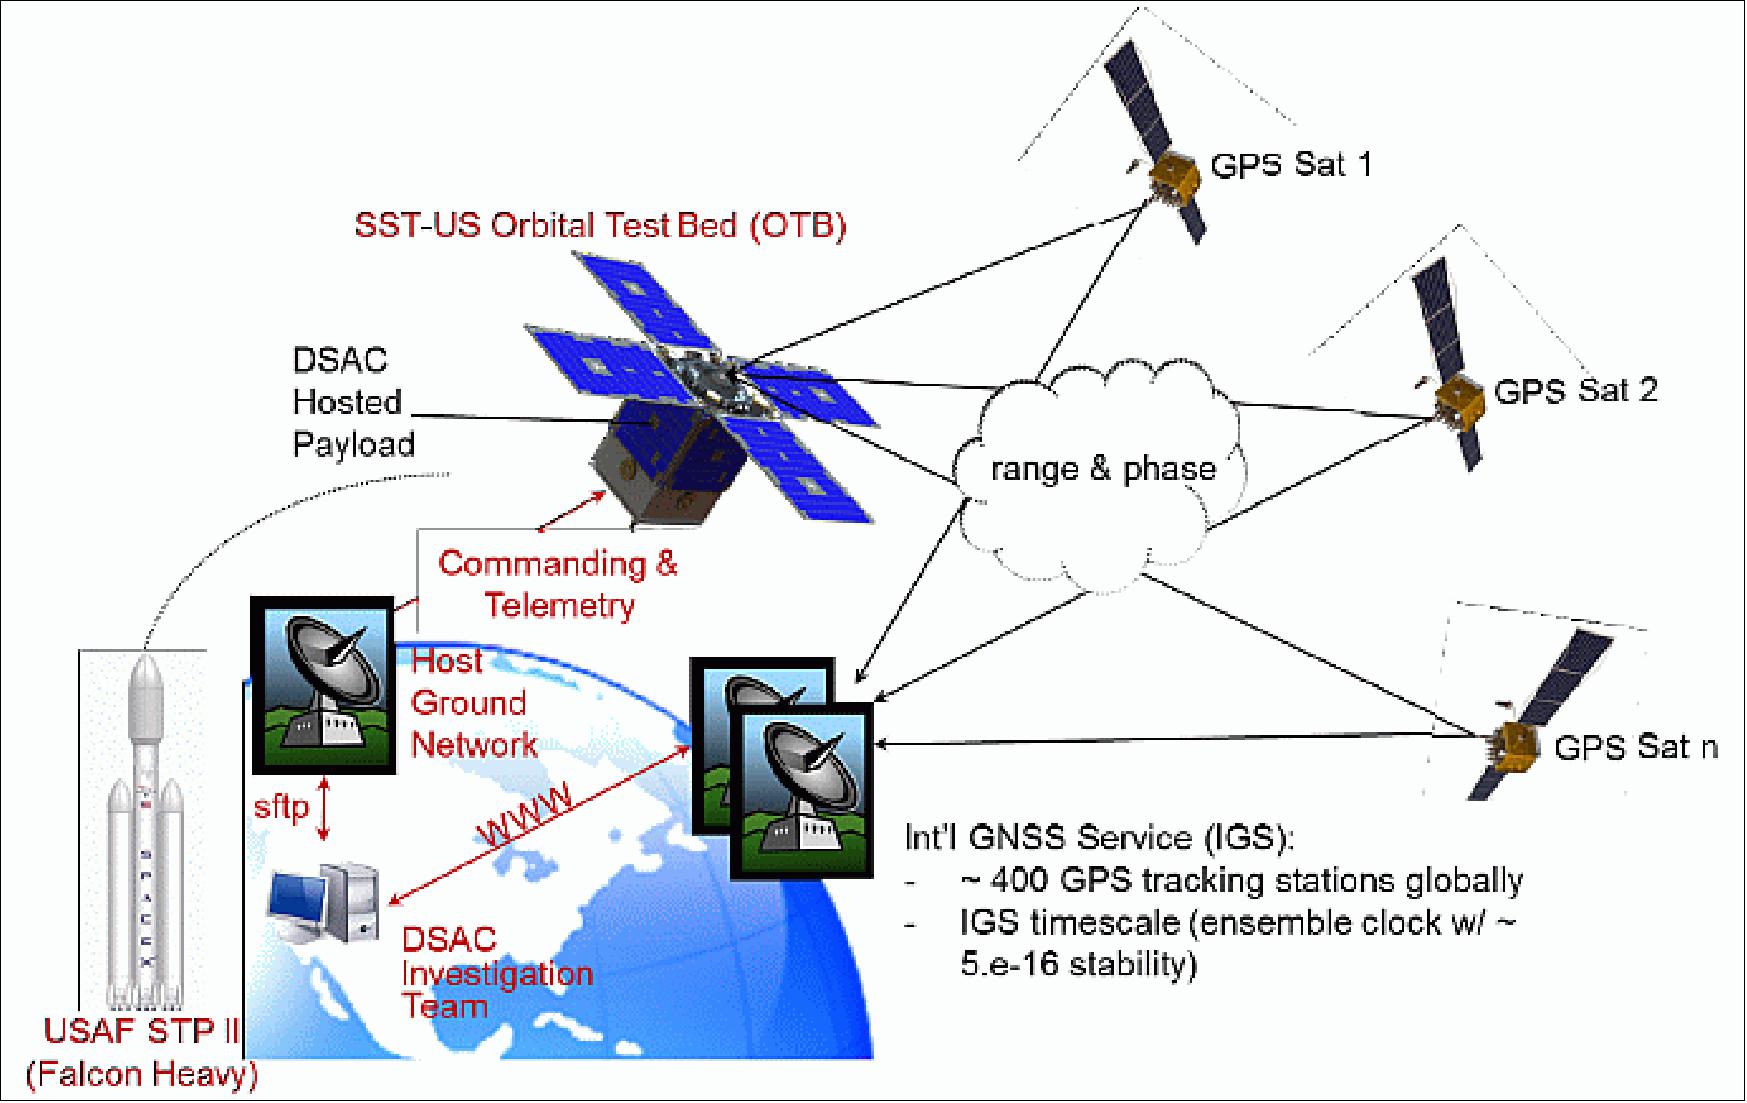 Figure 5: Overview of the OTB-1/DSAC mission architecture (image credit: NASA/JPL)